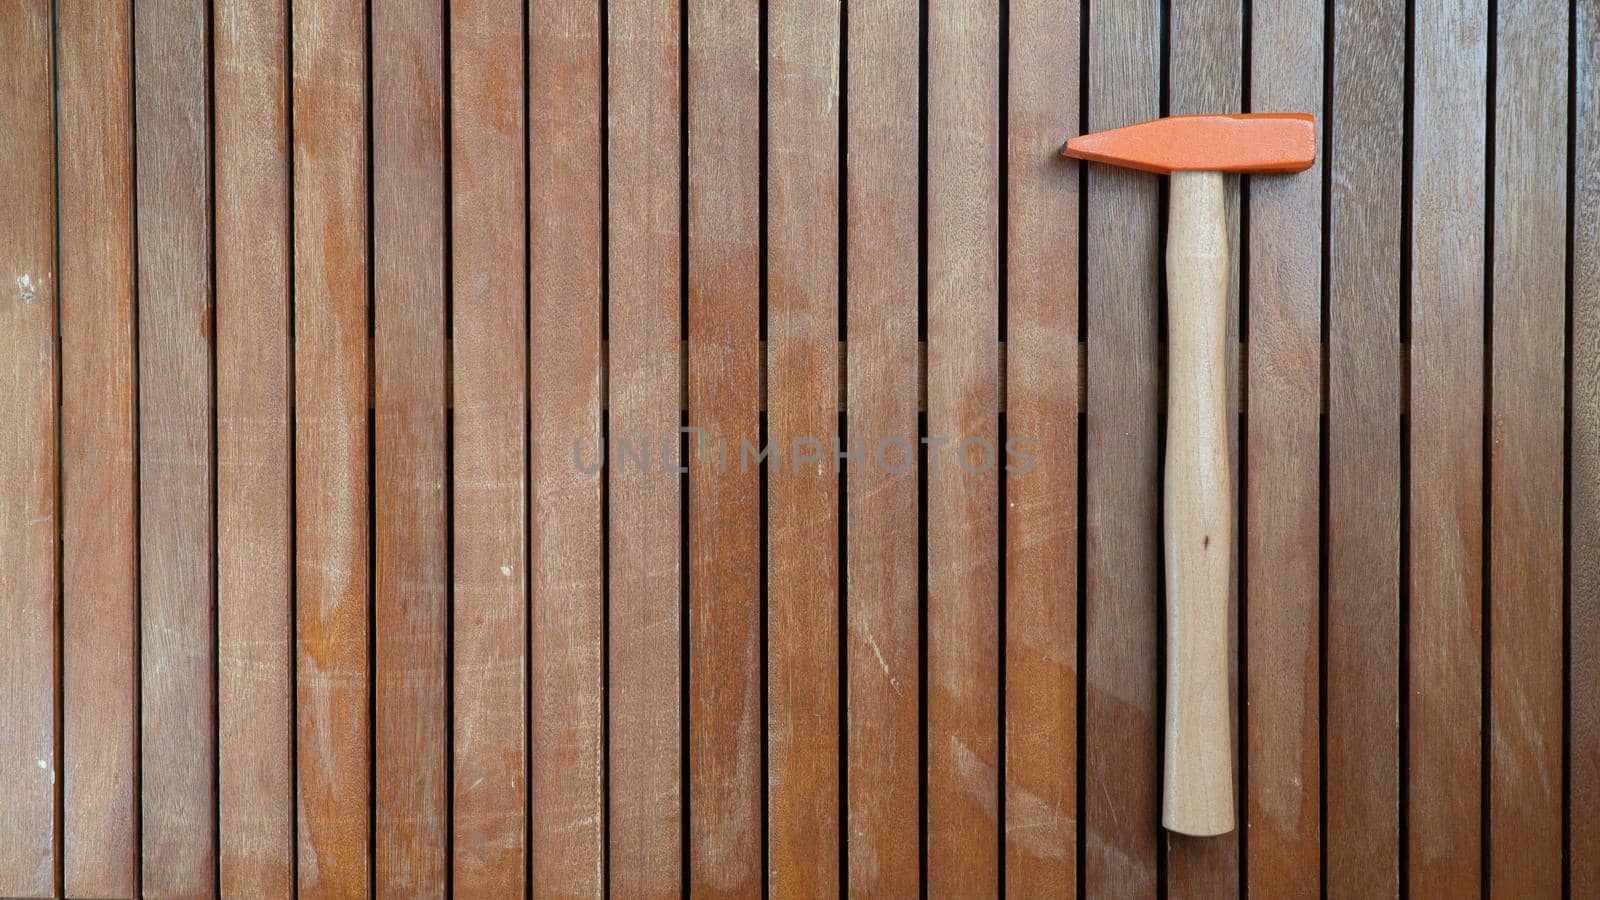 Hammer on wooden background vertical boards with free space for text by voktybre